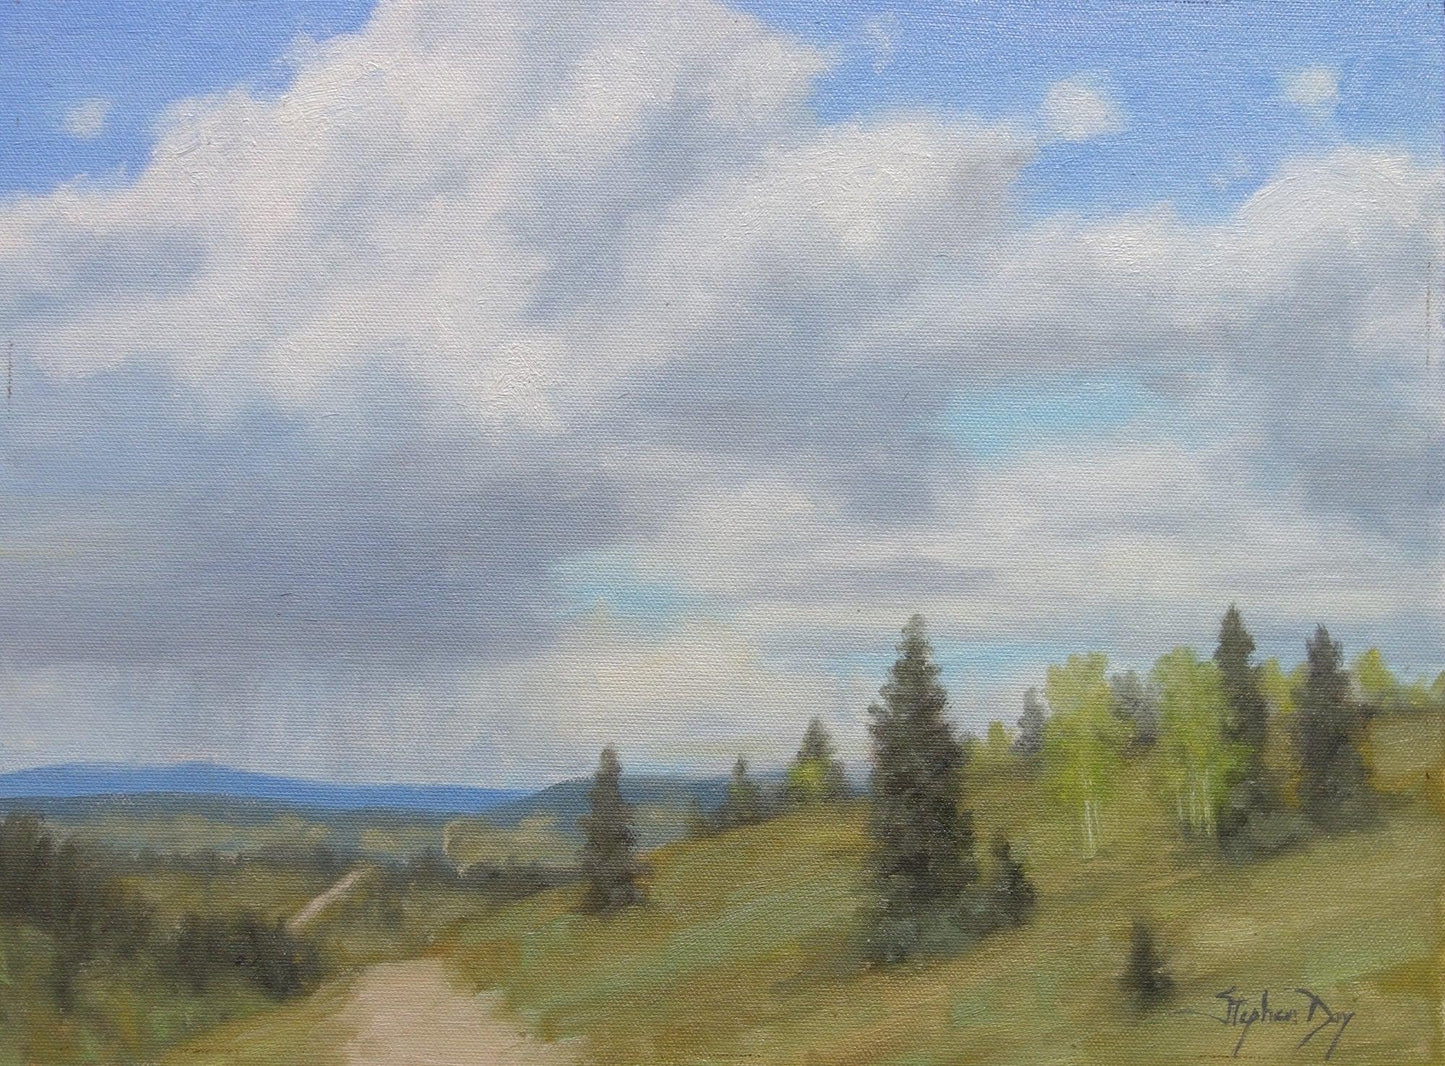 Mountain Clouds-Painting-Stephen Day-Sorrel Sky Gallery